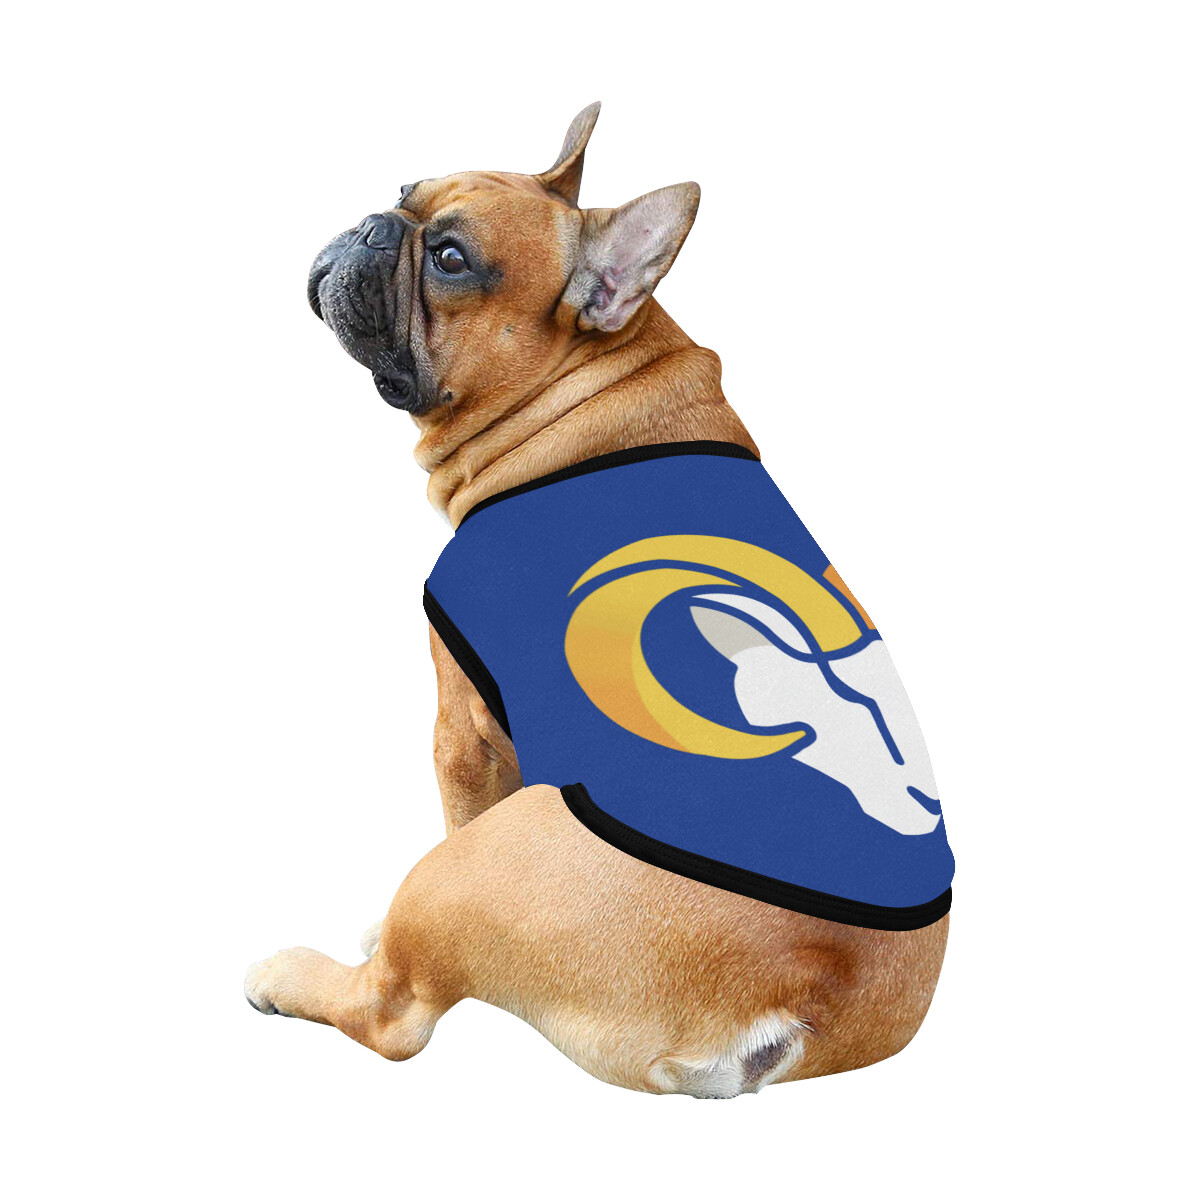 🐕 Los Angeles Rams Dog shirt, Dog Tank Top, Dog t-shirt, Dog clothes, Gifts, front back print, 7 sizes XS to 3XL, dog gifts, blue